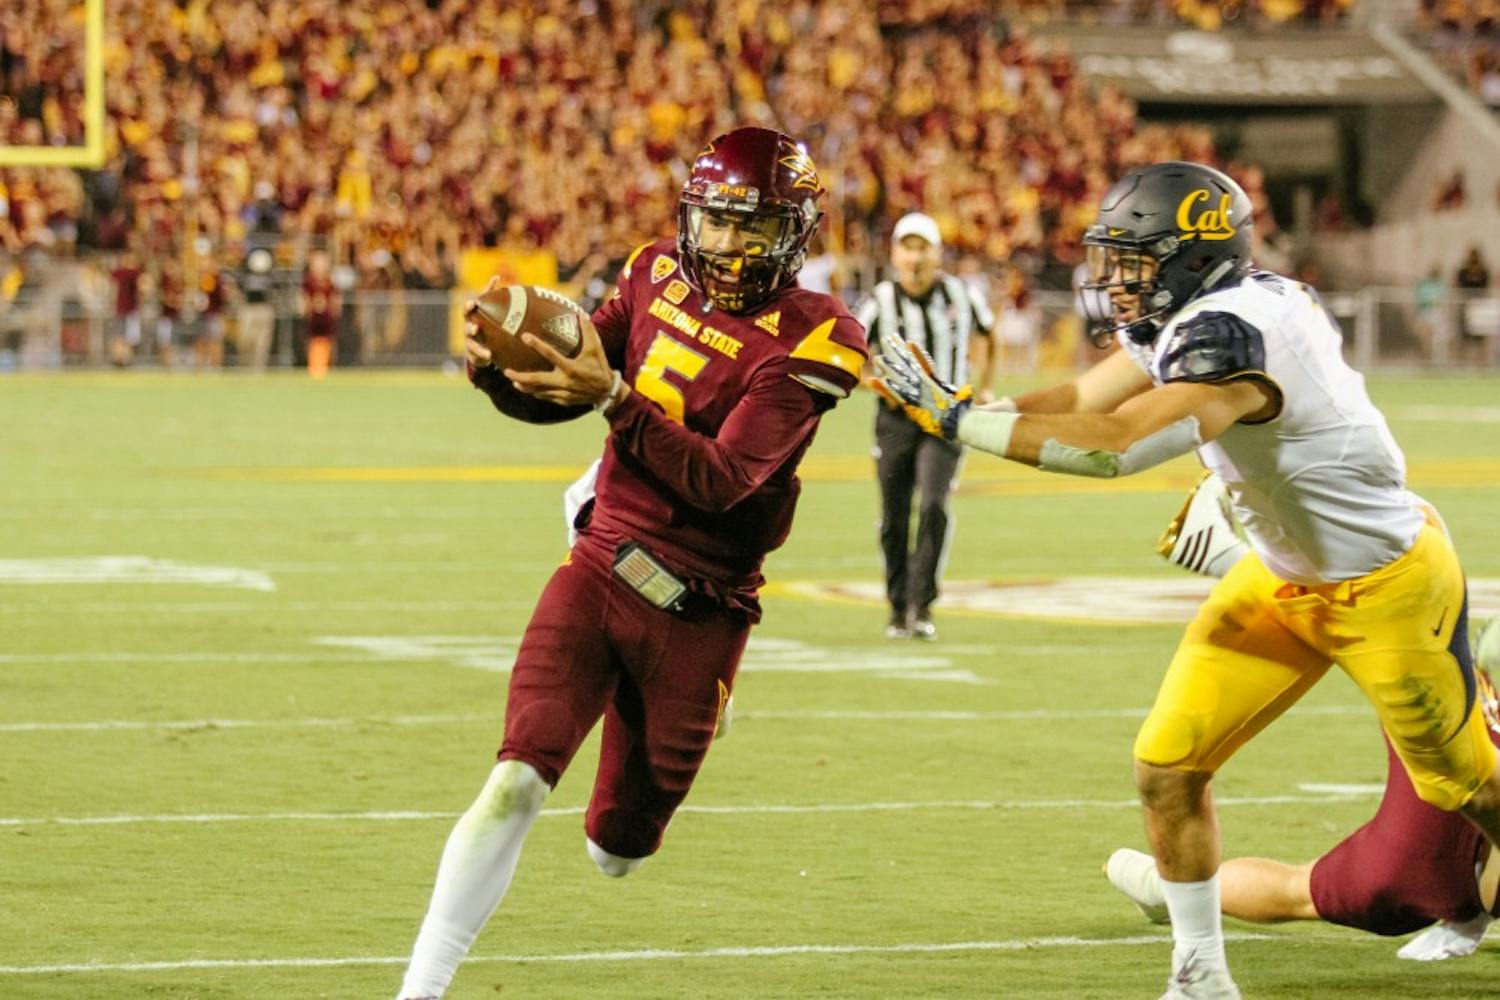 ASU quarterback, Manny Wilkins (5) crossing the goal line for a touchdown during the first half of the football game versus the California Golden Bears in Tempe, Arizona, on Saturday, Sept. 24, 2016.